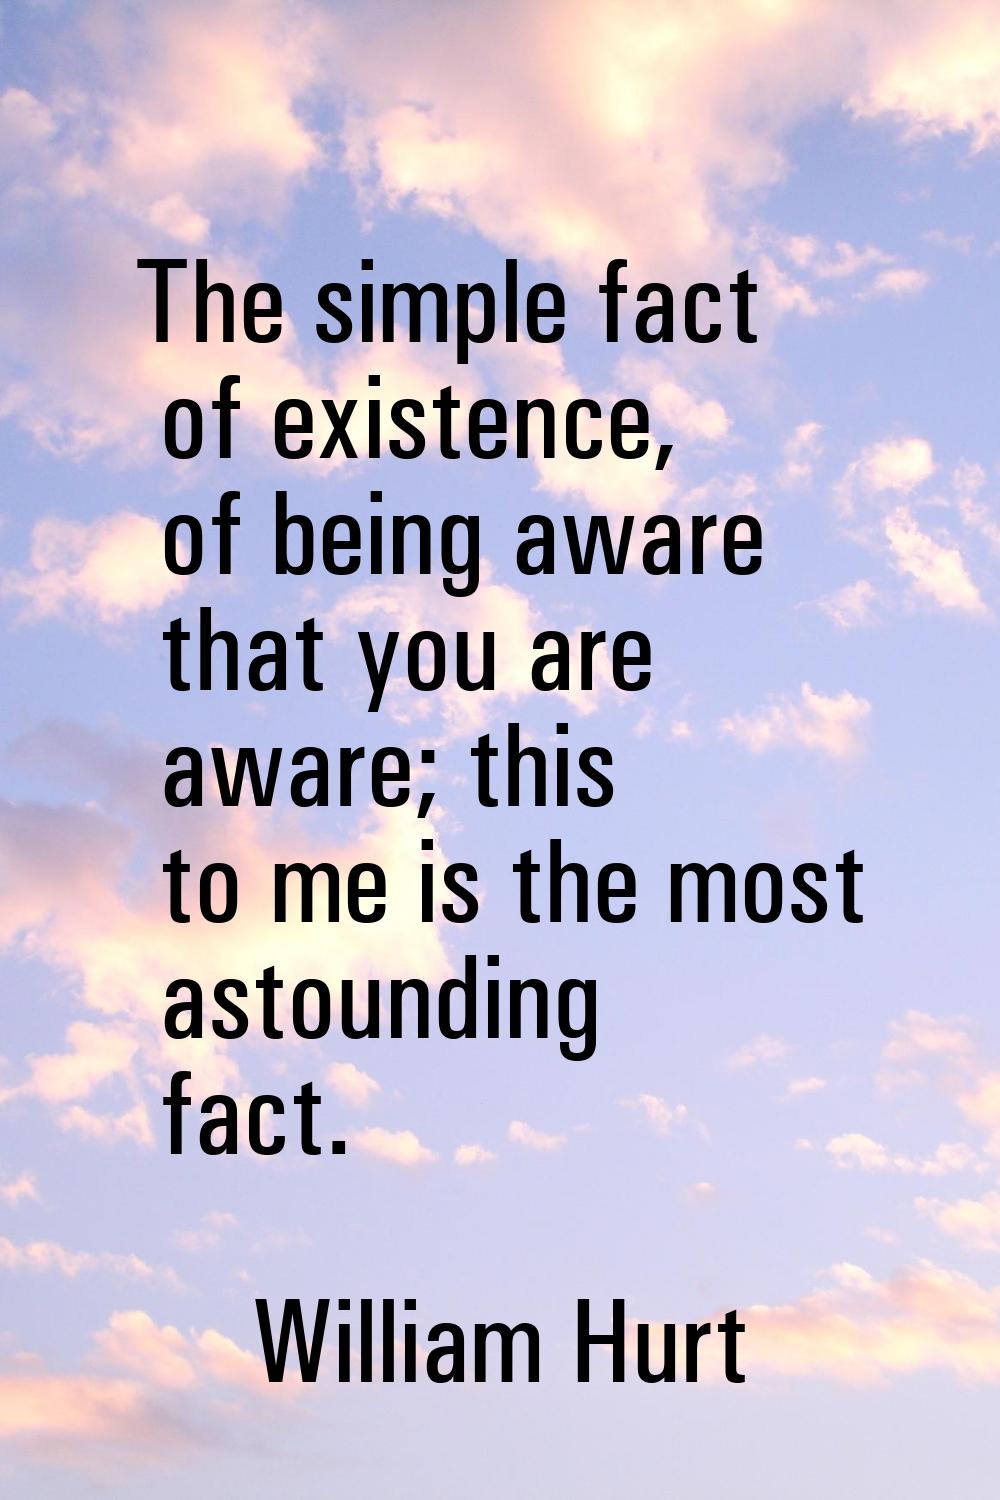 The simple fact of existence, of being aware that you are aware; this to me is the most astounding 